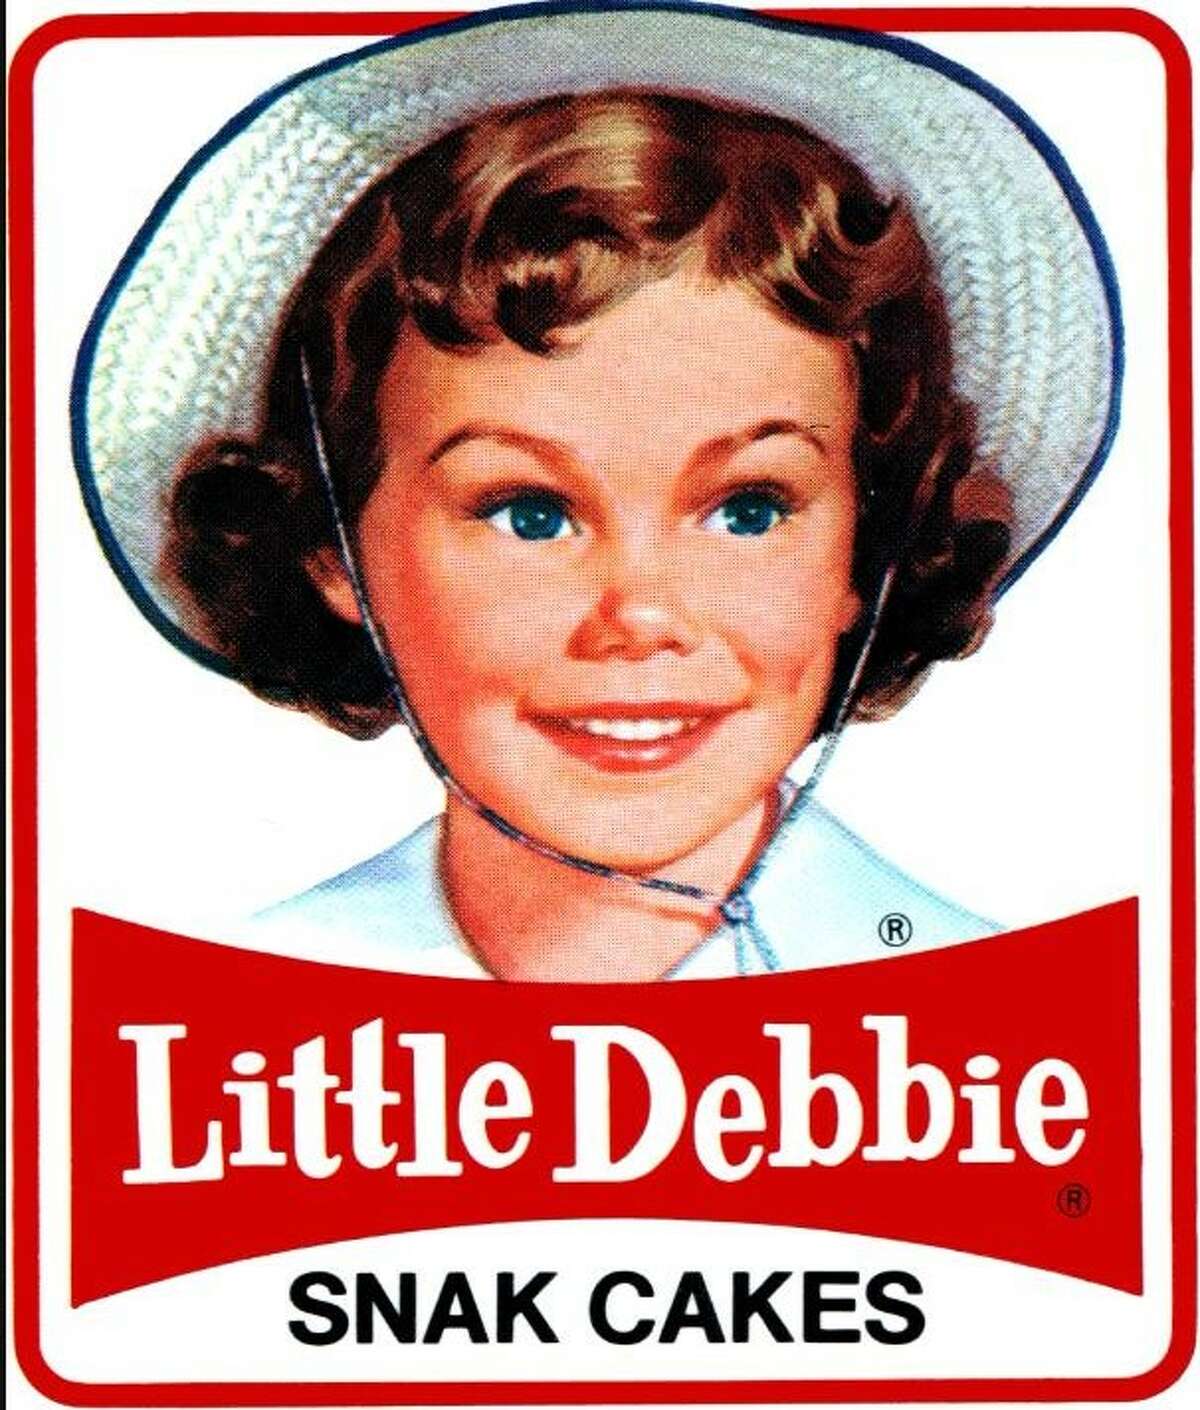 The familiar Little Debbie logo features the founders' granddaughter, Debbie.